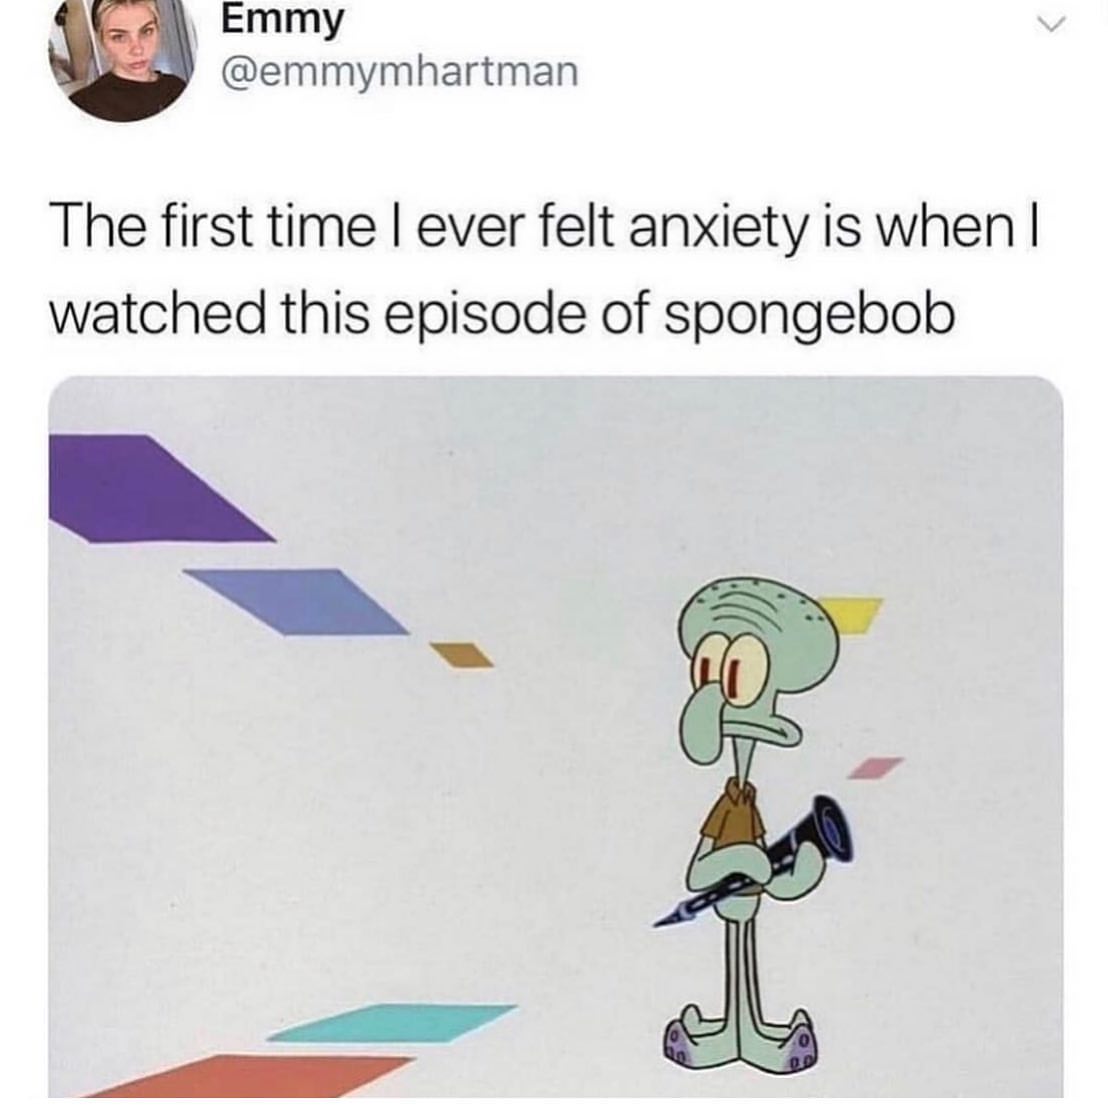 Spongebob Meme, Anxiety, Squidward, Time Travel, Confused spongebob-memes spongebob text: Emmy @emmymhartman The first time I ever felt anxiety is when I watched this episode of spongebob 